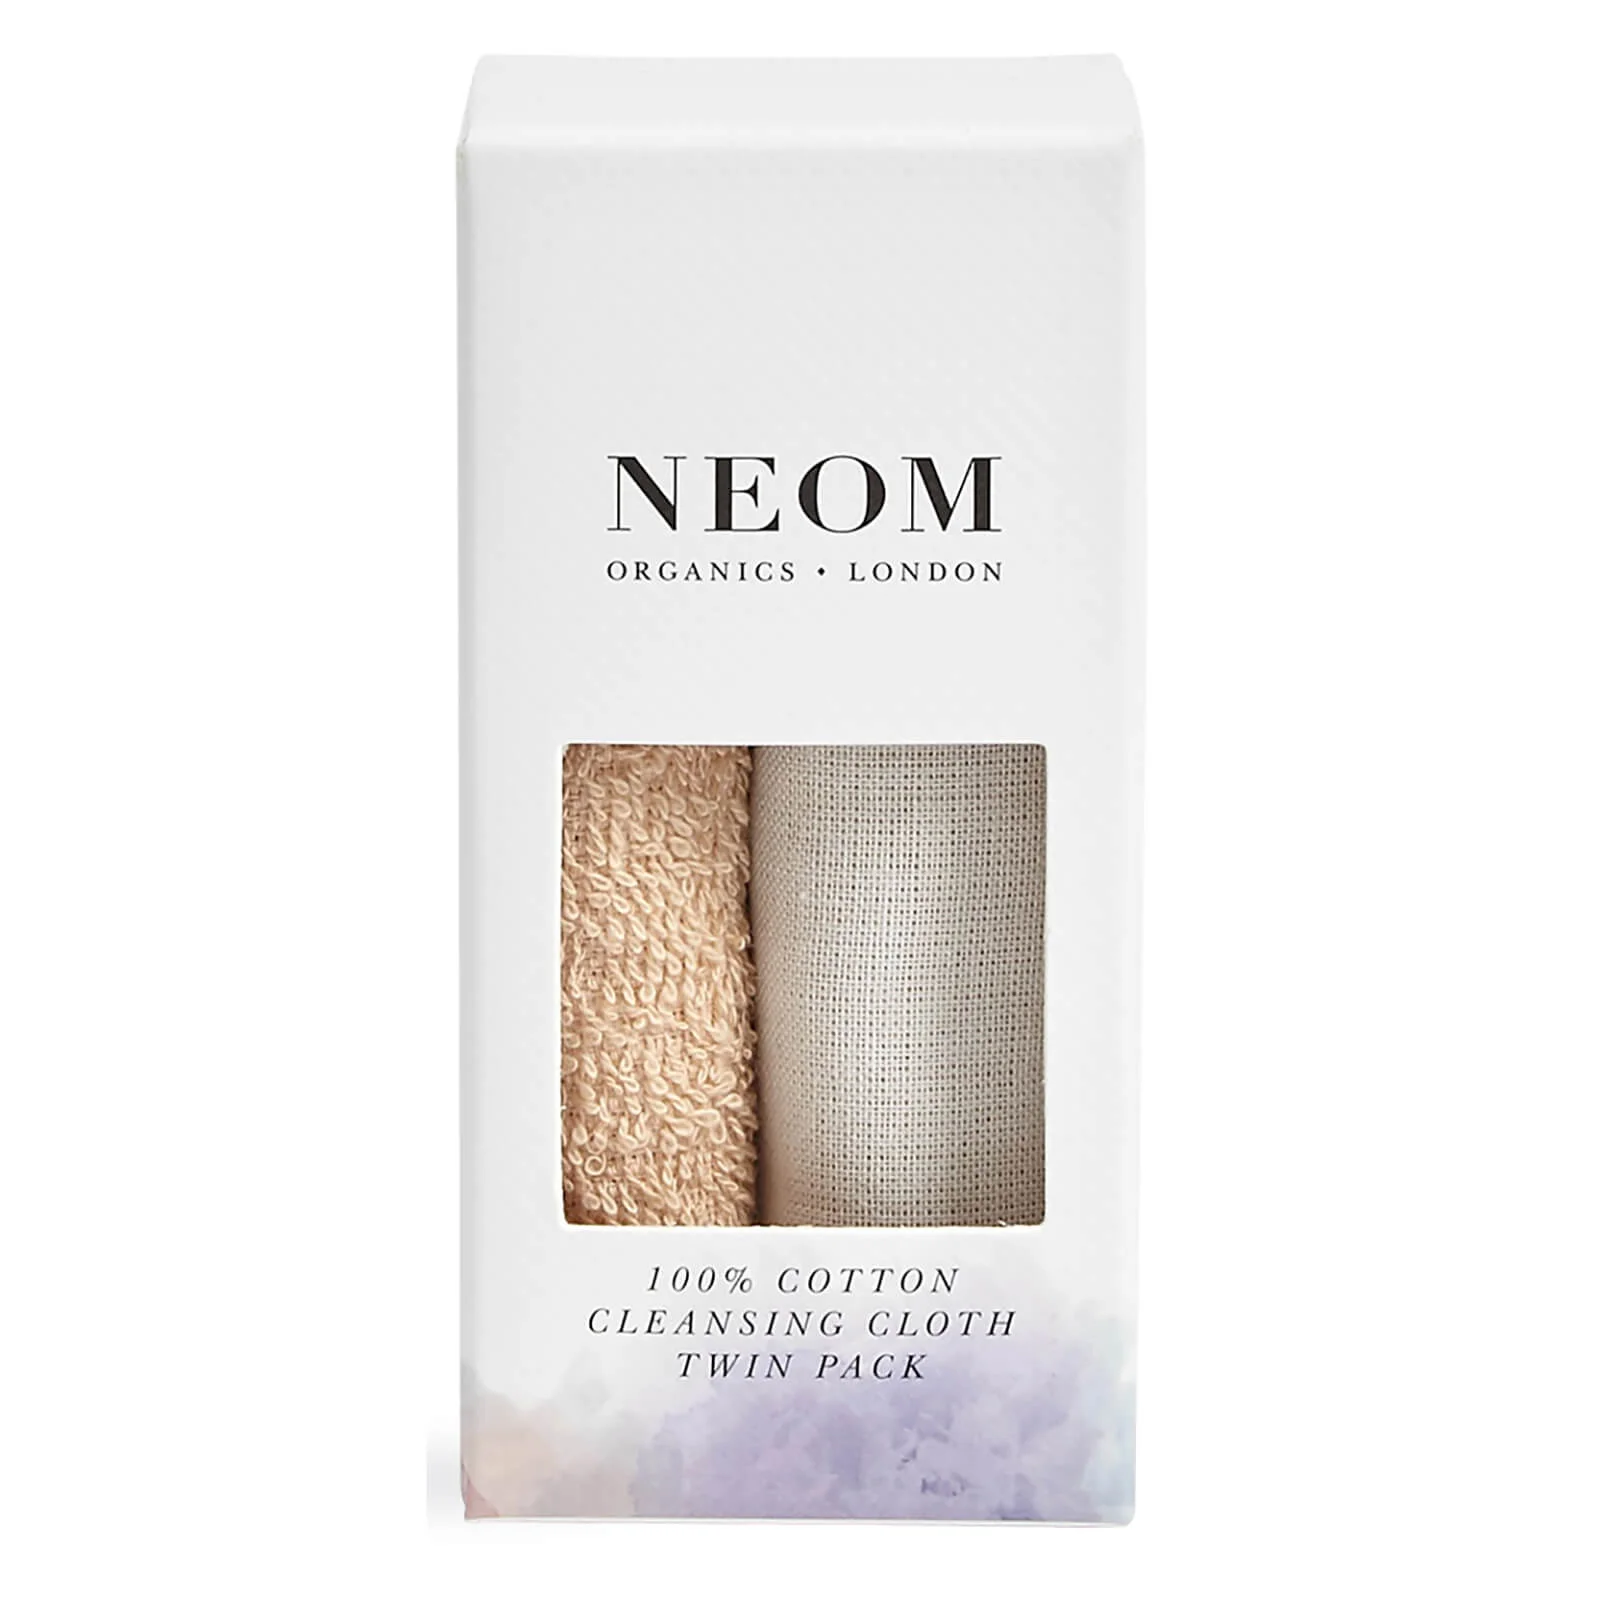 NEOM Organics London 100% Cotton Cleansing Cloth Twin Pack Image 1